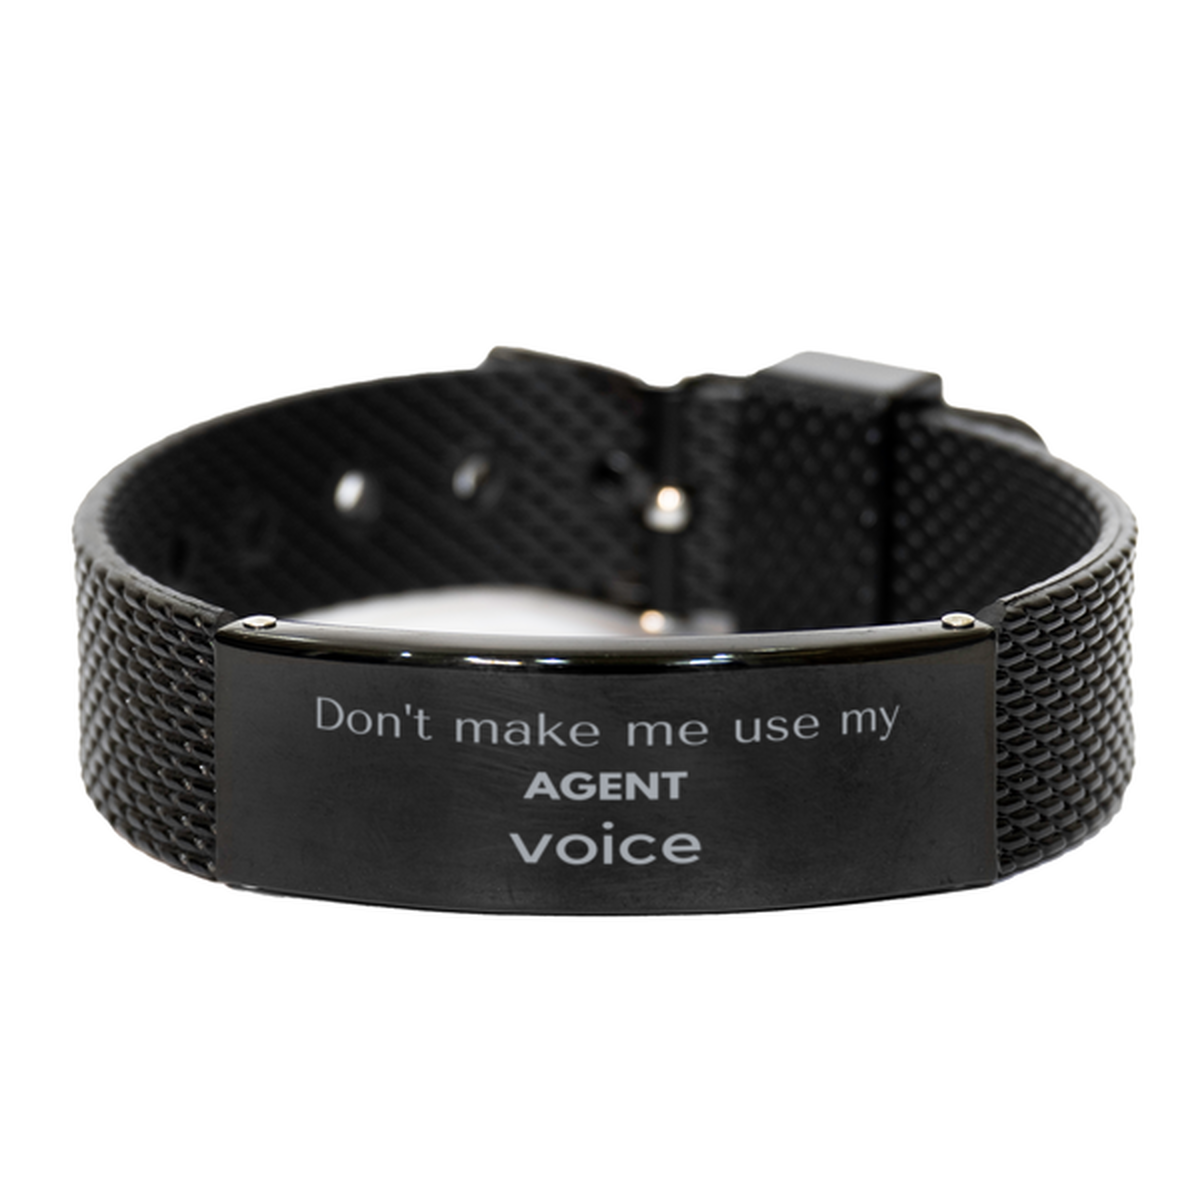 Don't make me use my Agent voice, Sarcasm Agent Gifts, Christmas Agent Black Shark Mesh Bracelet Birthday Unique Gifts For Agent Coworkers, Men, Women, Colleague, Friends